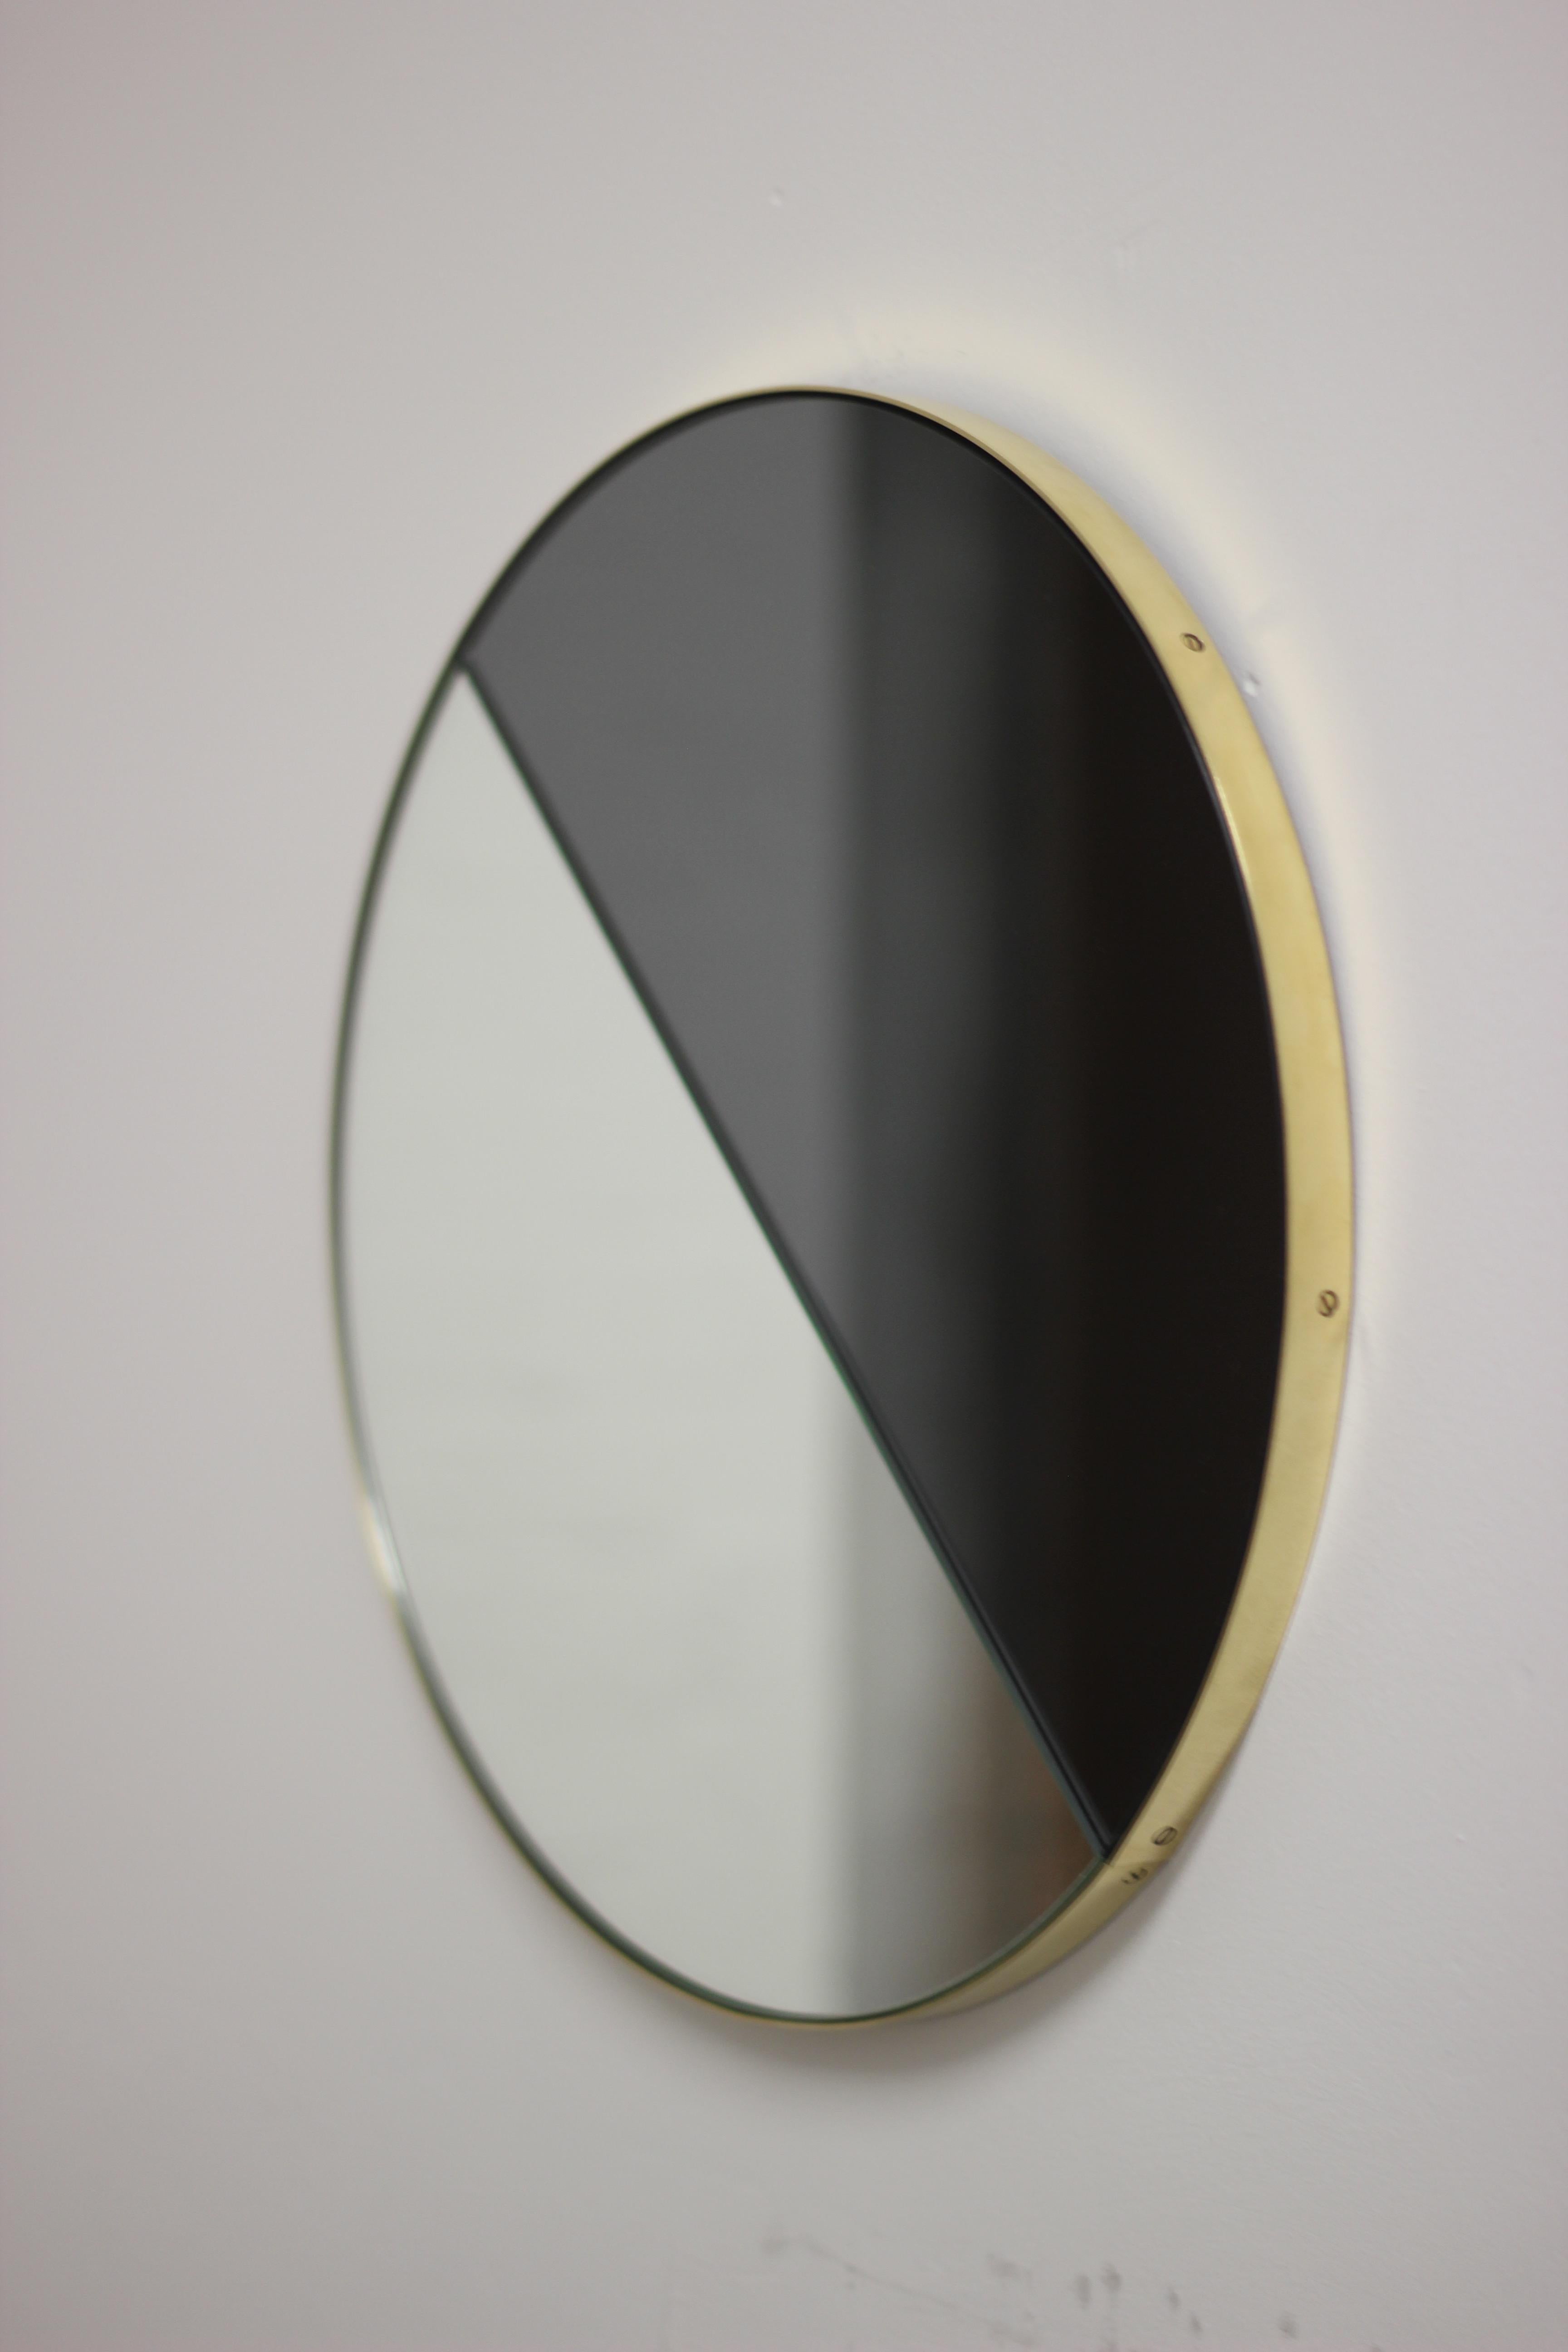 Modern Orbis Dualis Mixed Tint Contemporary Round Mirror with Brass Frame, Large For Sale